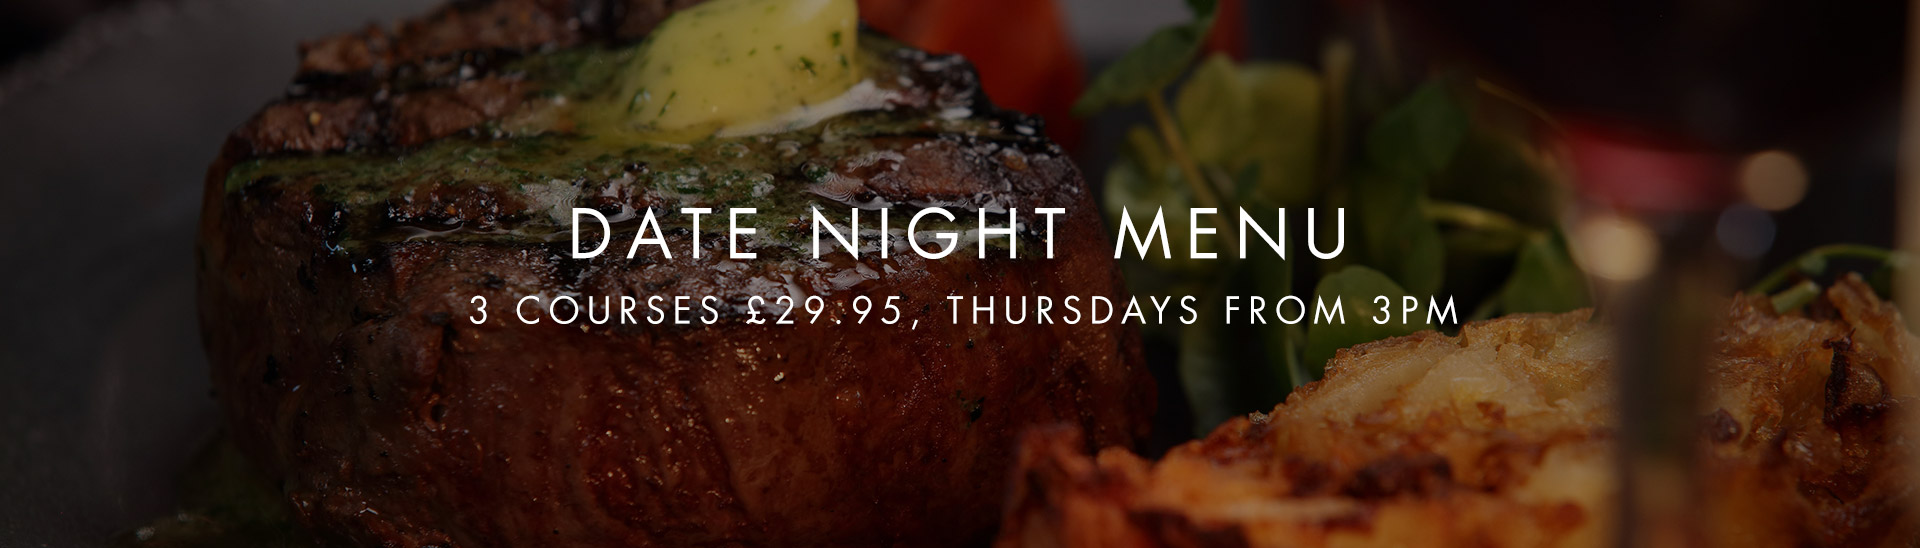 Dates & Steaks at Miller & Carter Cardiff Bay